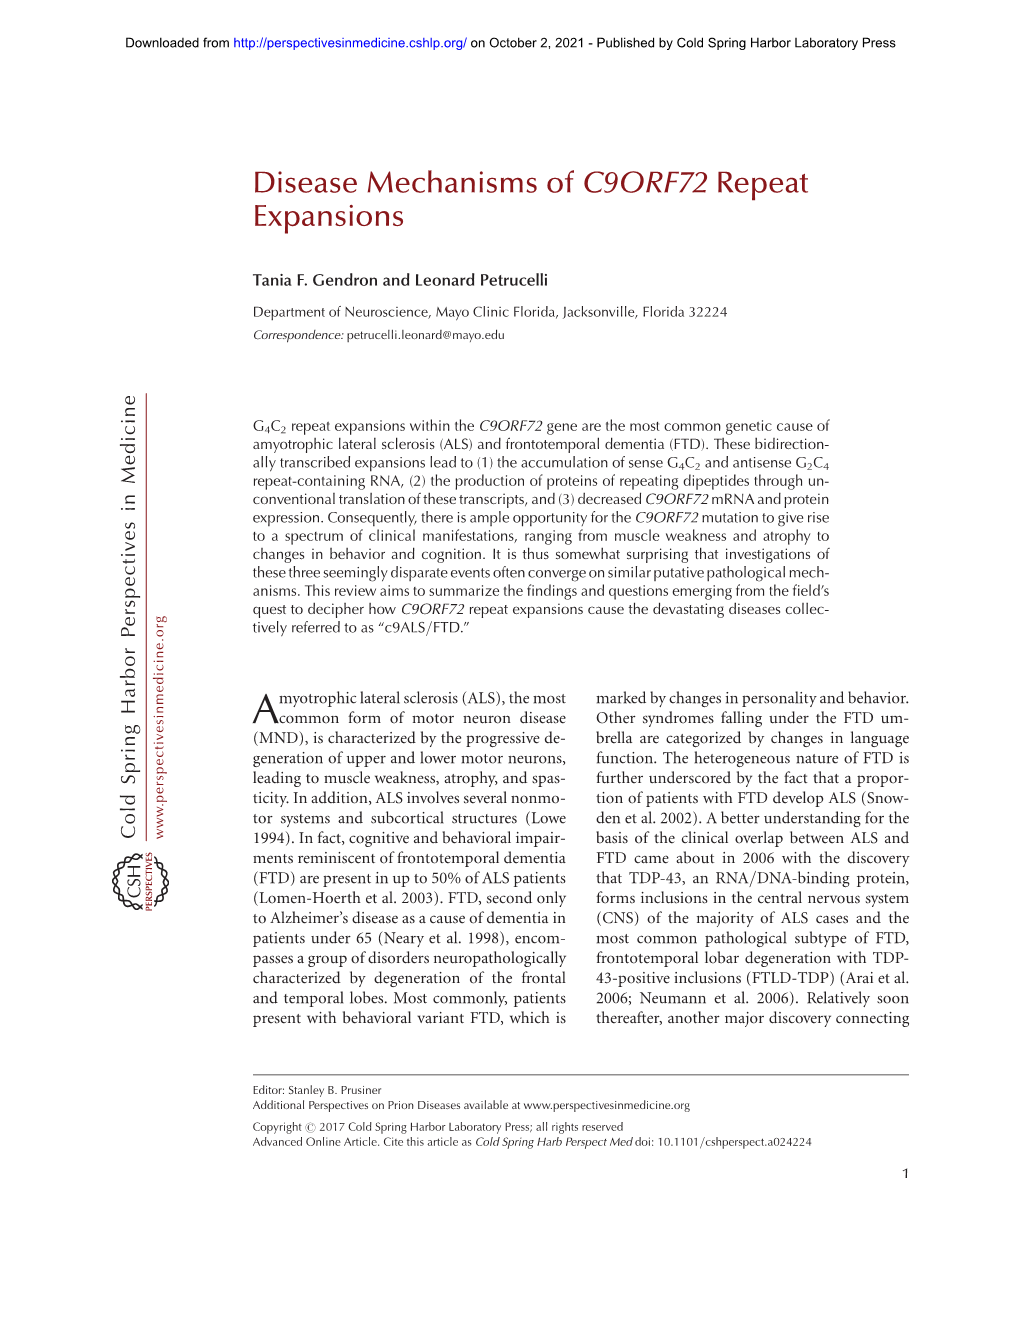 Disease Mechanisms of C9ORF72 Repeat Expansions